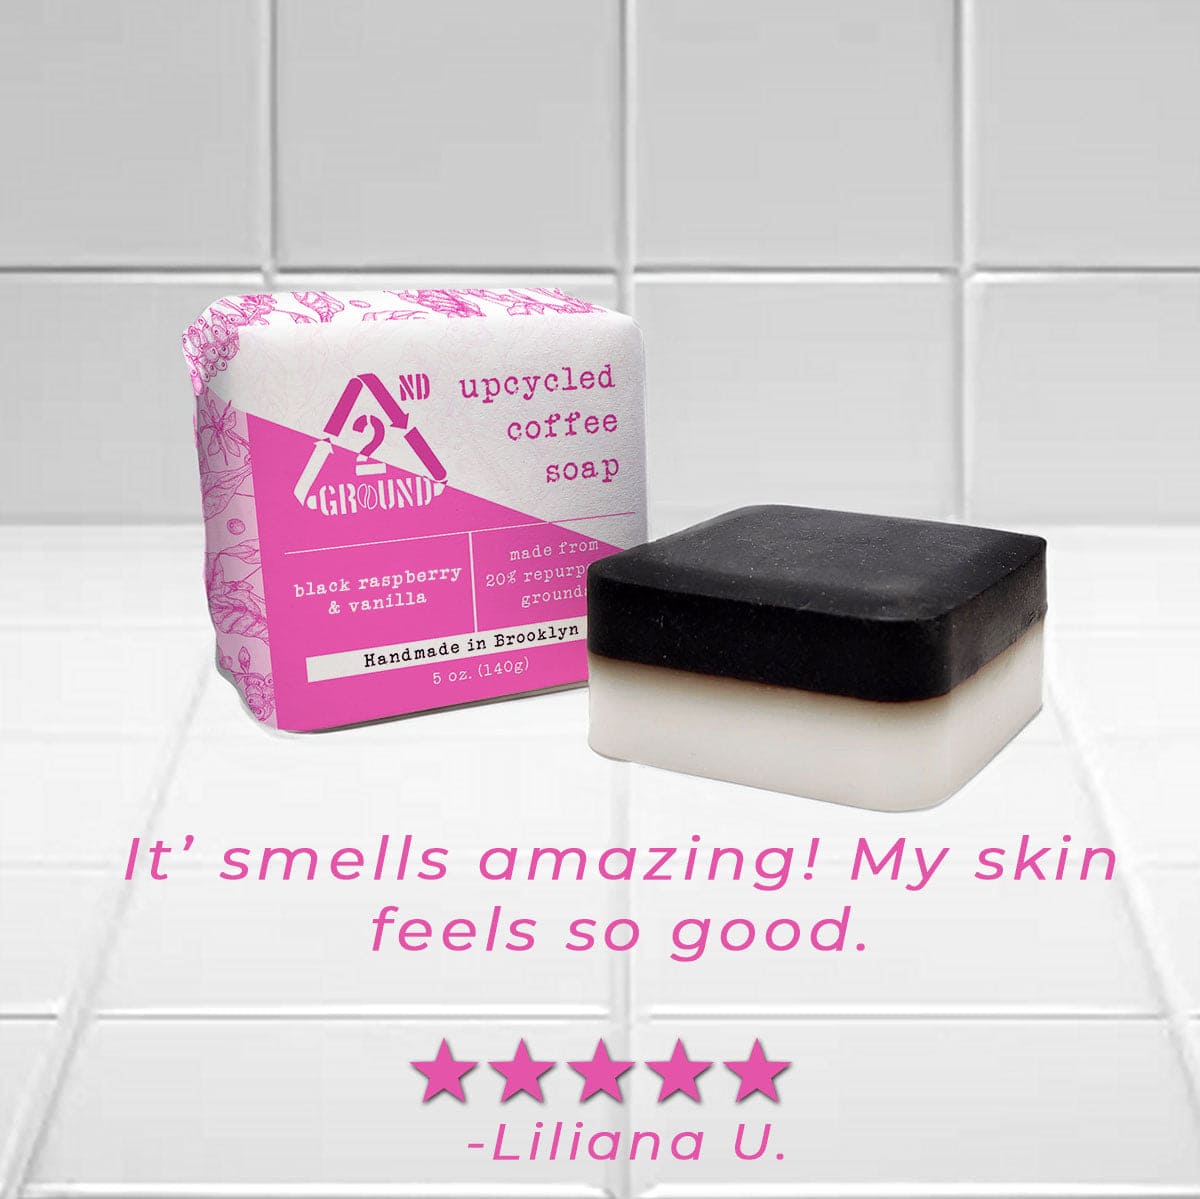 Customer review of black raspberry and vanilla upcycled coffee soap